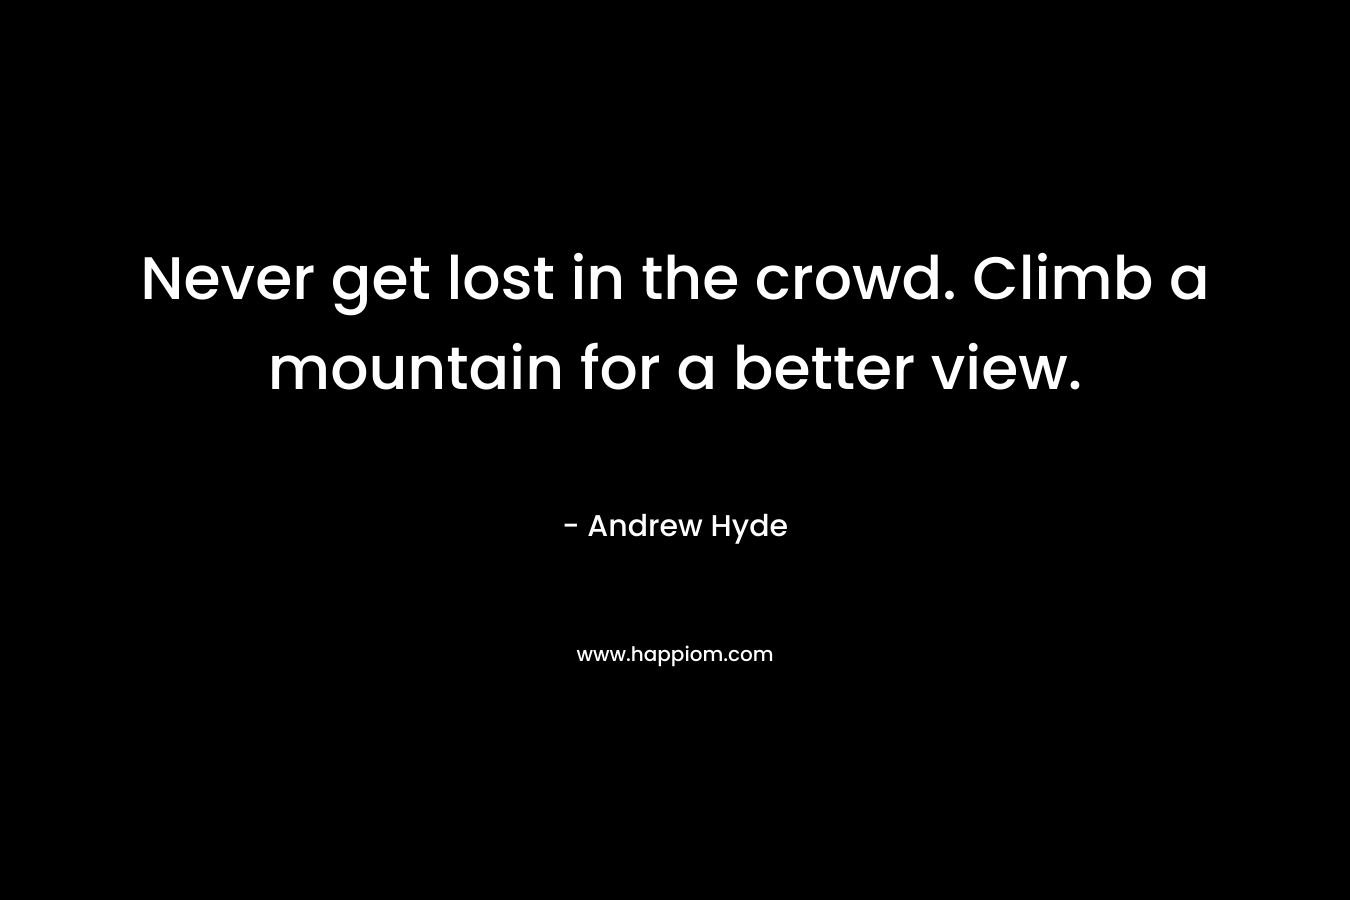 Never get lost in the crowd. Climb a mountain for a better view. – Andrew Hyde